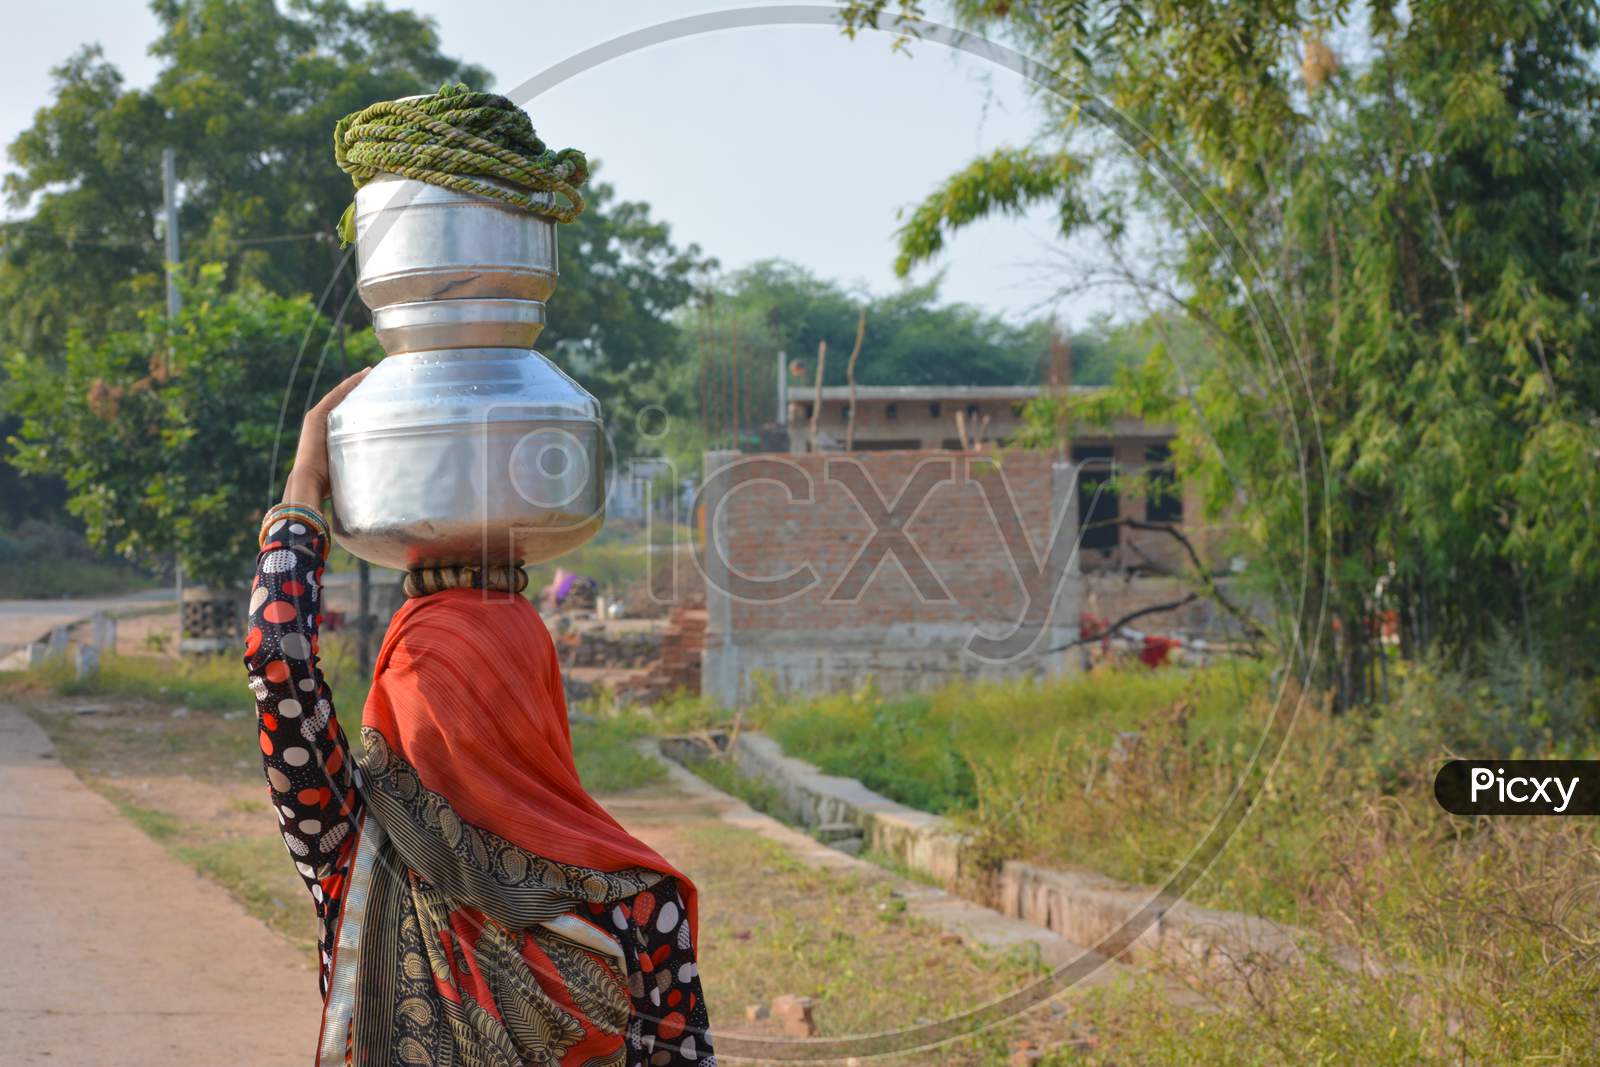 TIKAMGARH, MADHYA PRADESH, INDIA - NOVEMBER 12, 2019: An unidentified indian village woman carrying water on her head in traditional pot from well, An Indian rural scene.